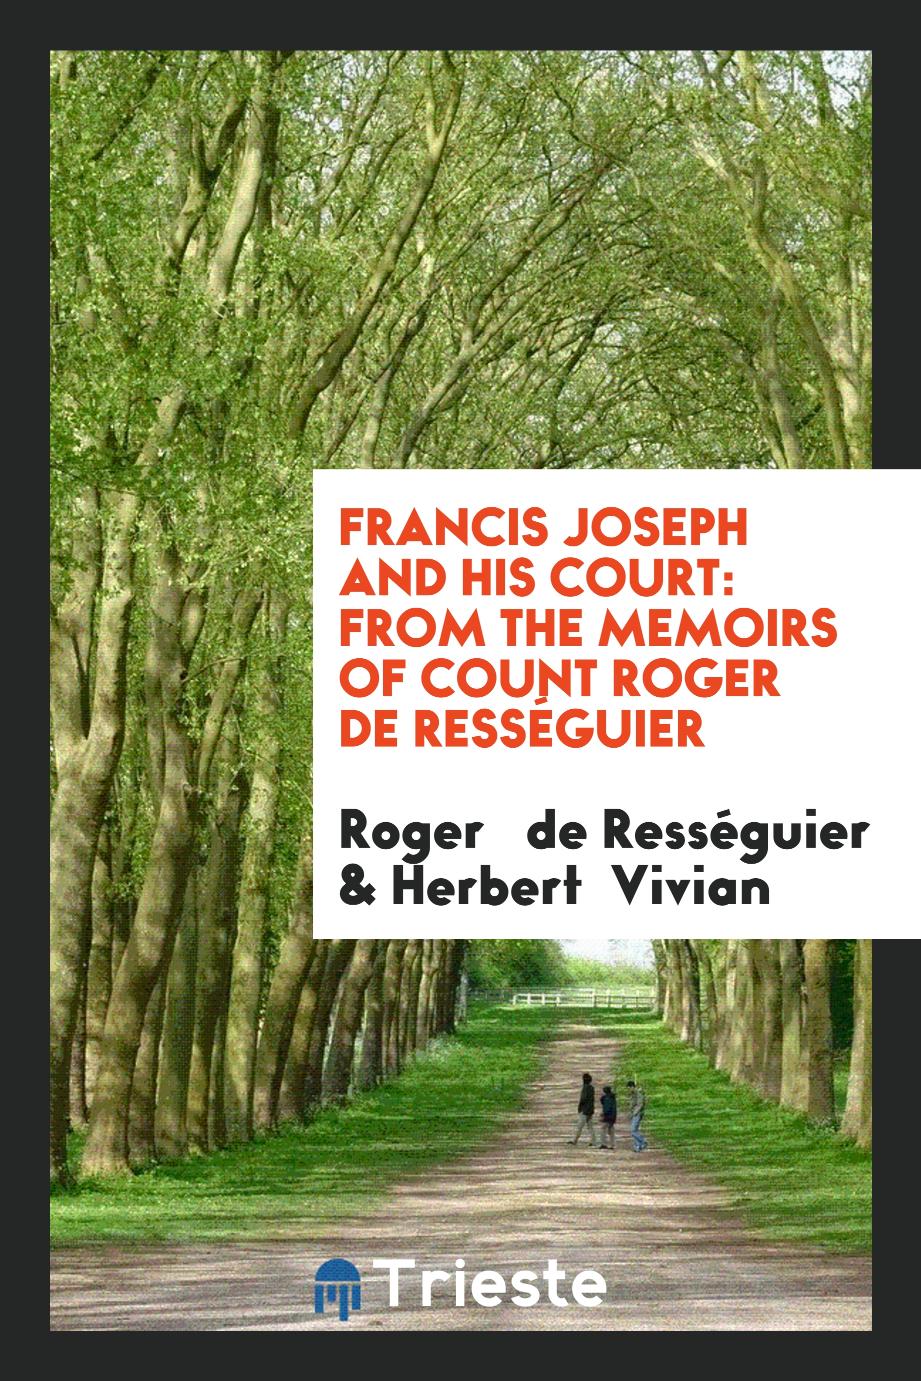 Francis Joseph and His Court: From the Memoirs of Count Roger de Rességuier